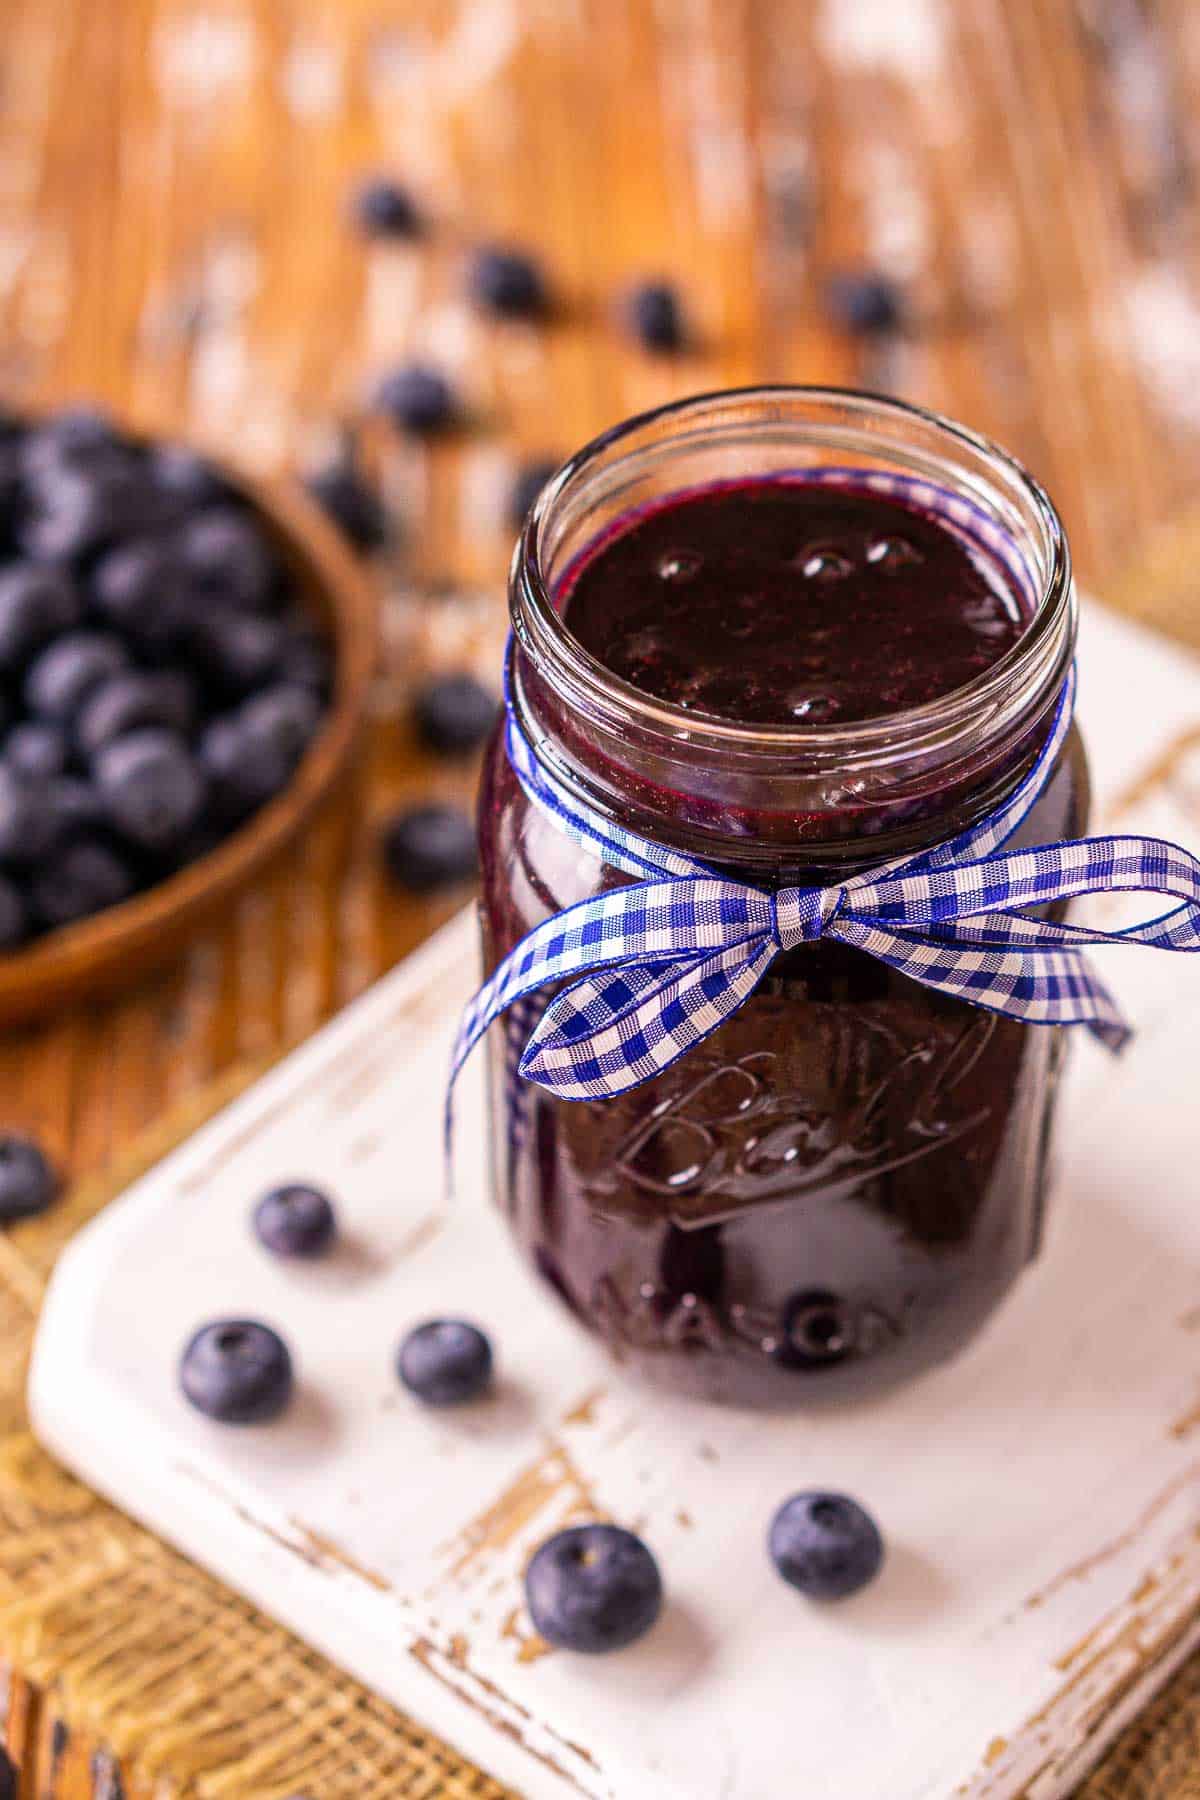 A jar of blueberry BBQ sauce with berries all around it and a plate of berries in the background.